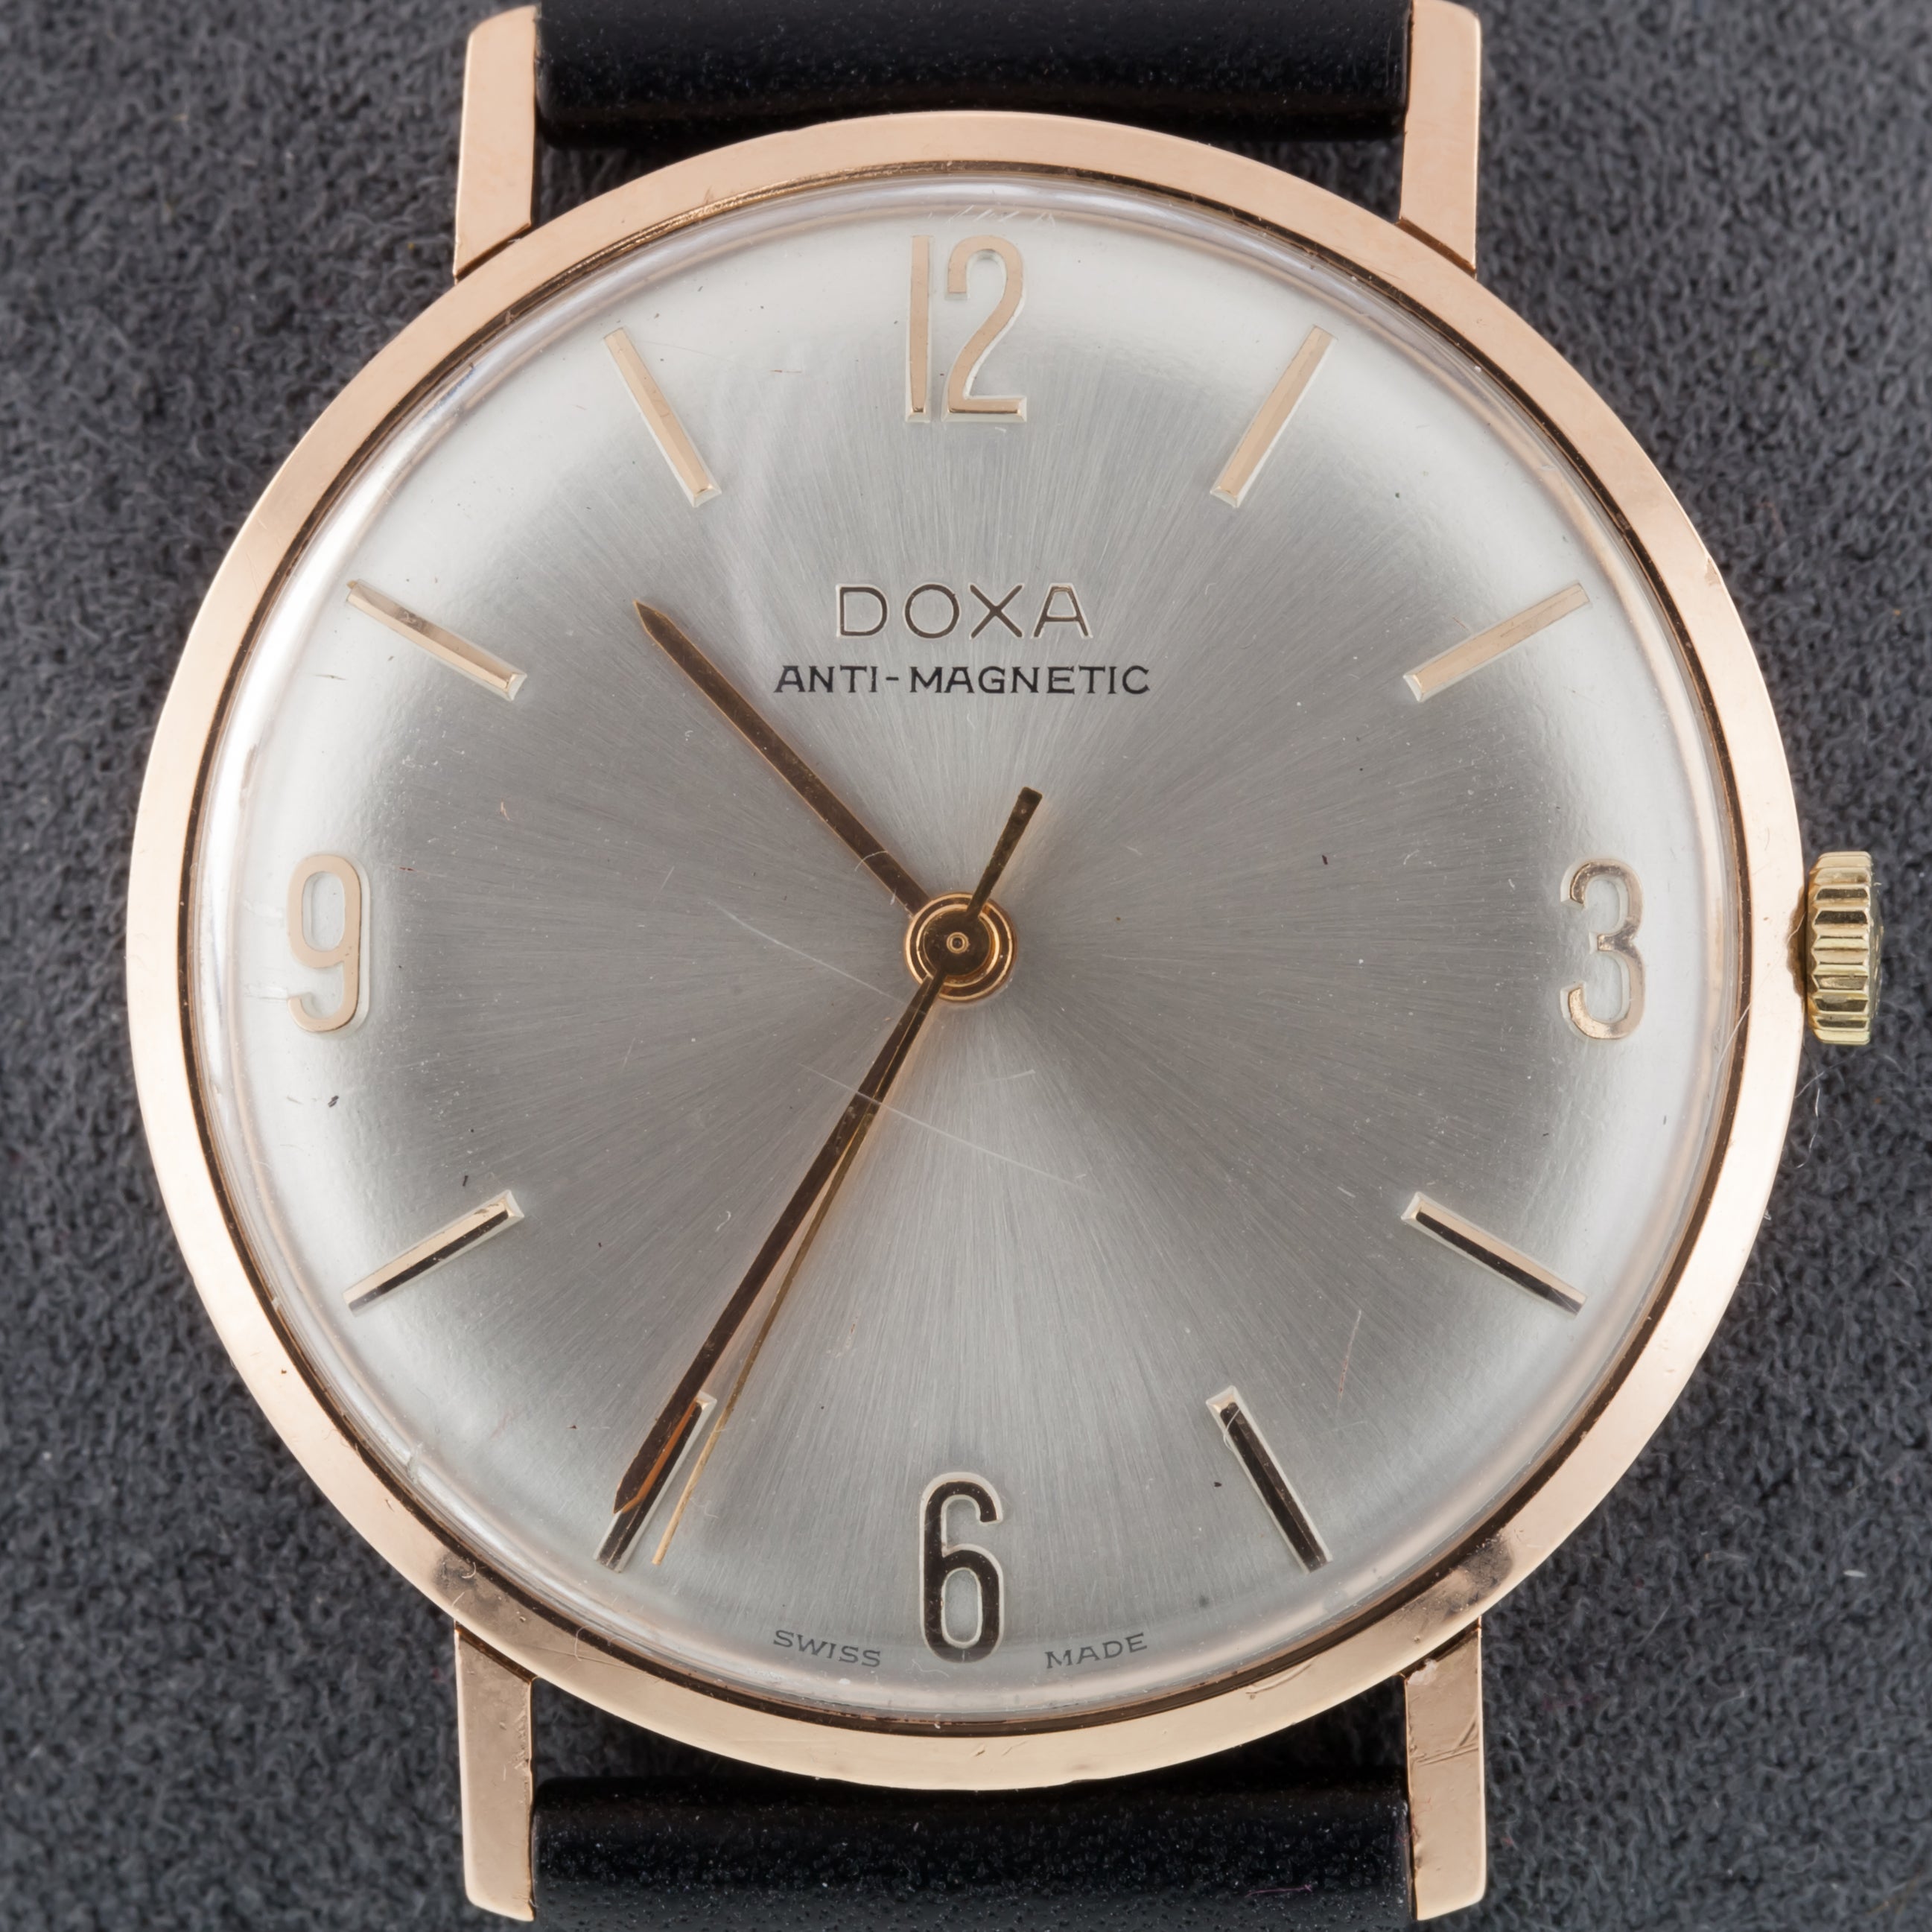 14k Rose Gold Doxa Men's Hand-Winding Watch w/ Leather Band
Movement #DOXA103
Case #1036514
Serial #1361518

14k Rose Gold Case
34 mm in Diameter (36 mm w/ Crown)
Lug-to-Lug Width = 18 mm
Lug-to-Lug Distance = 39 mm
Thickness = 7 mm

Satin Beige